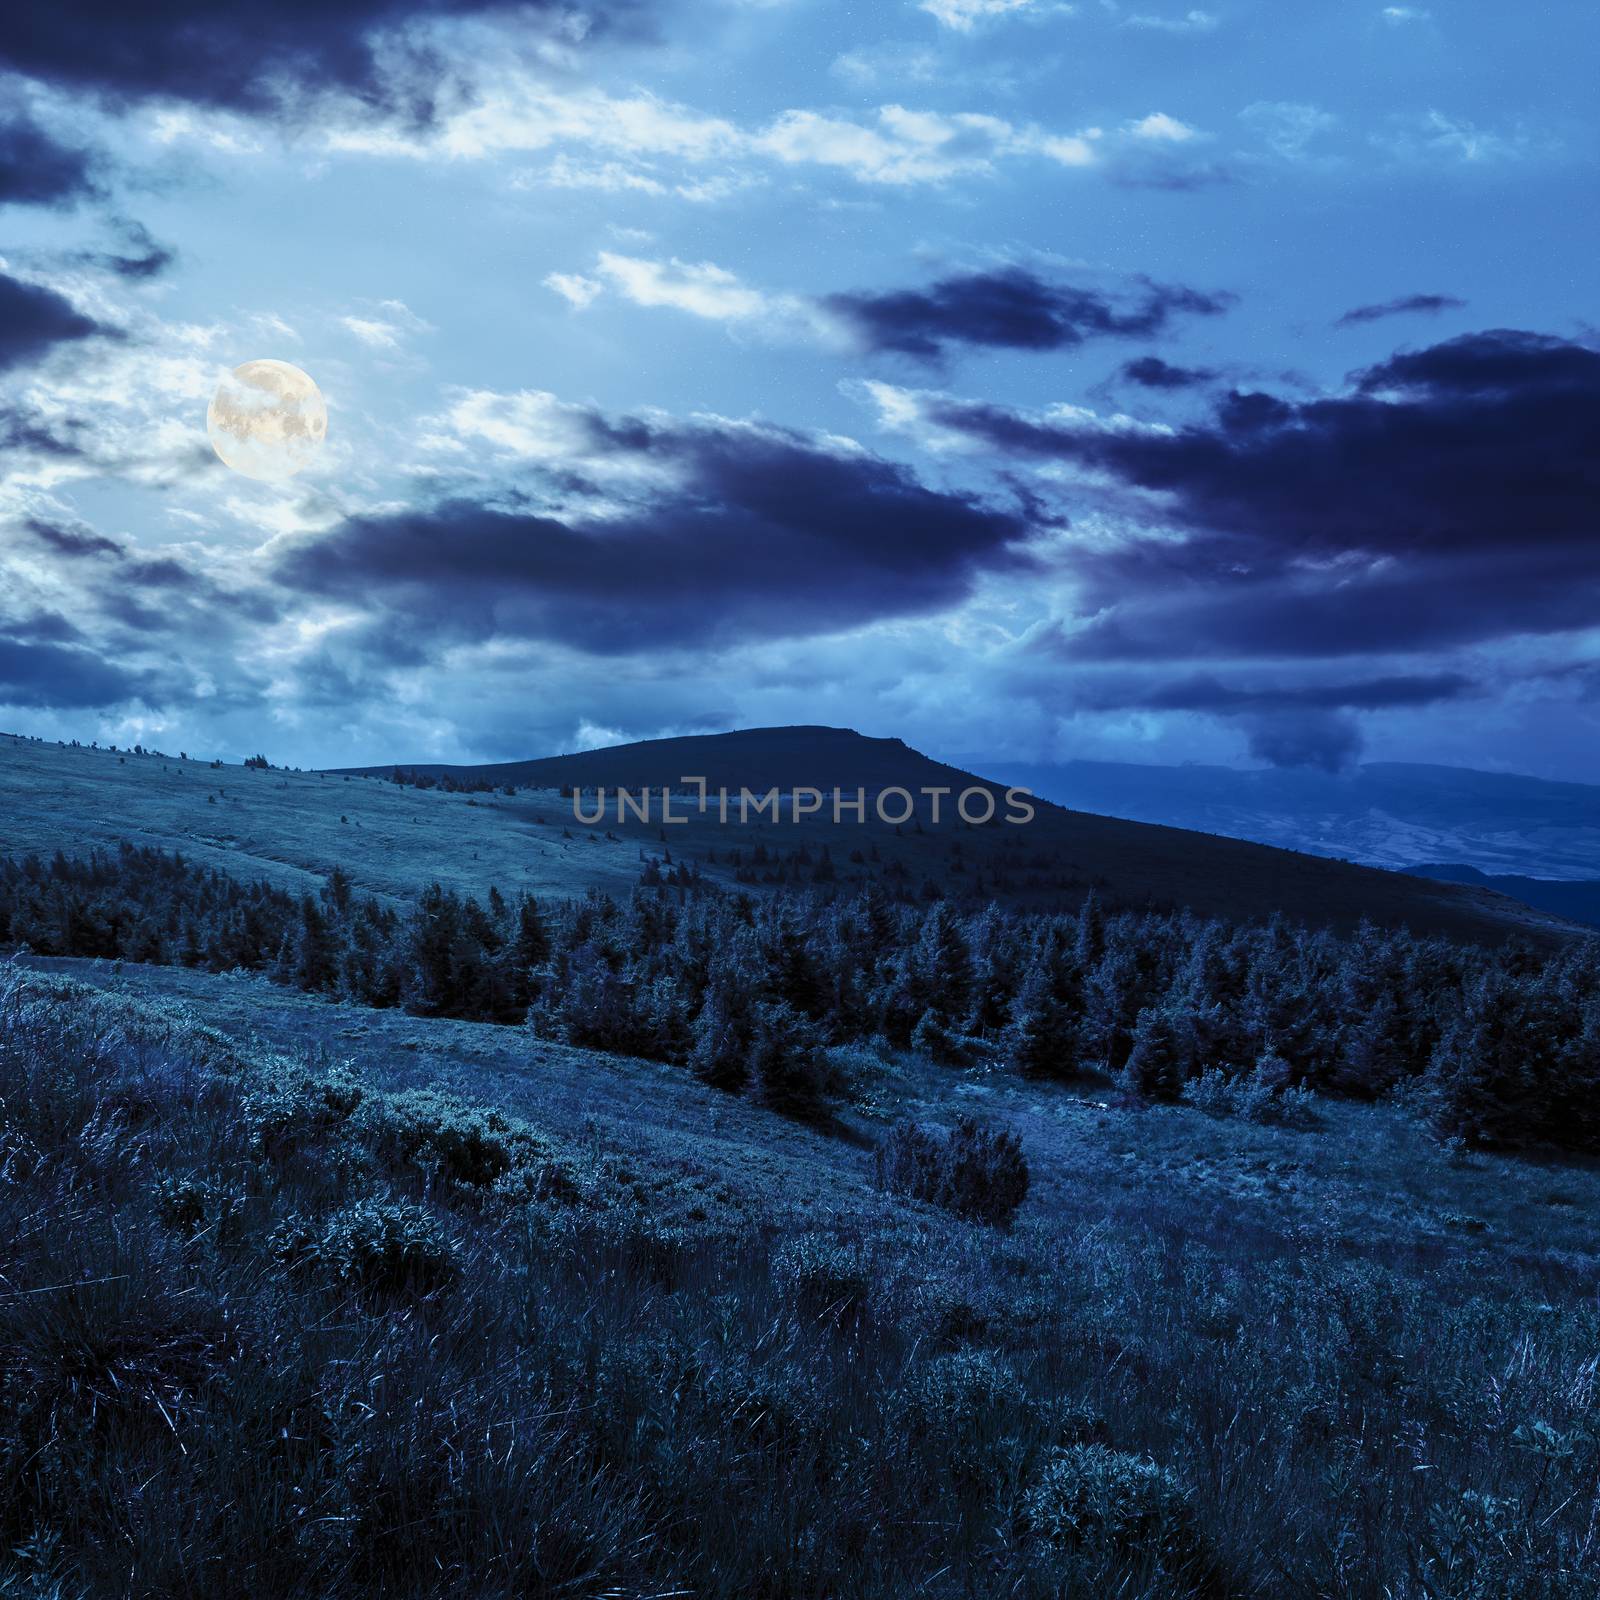 mountain range with pine forest on hillside at night in full moon light